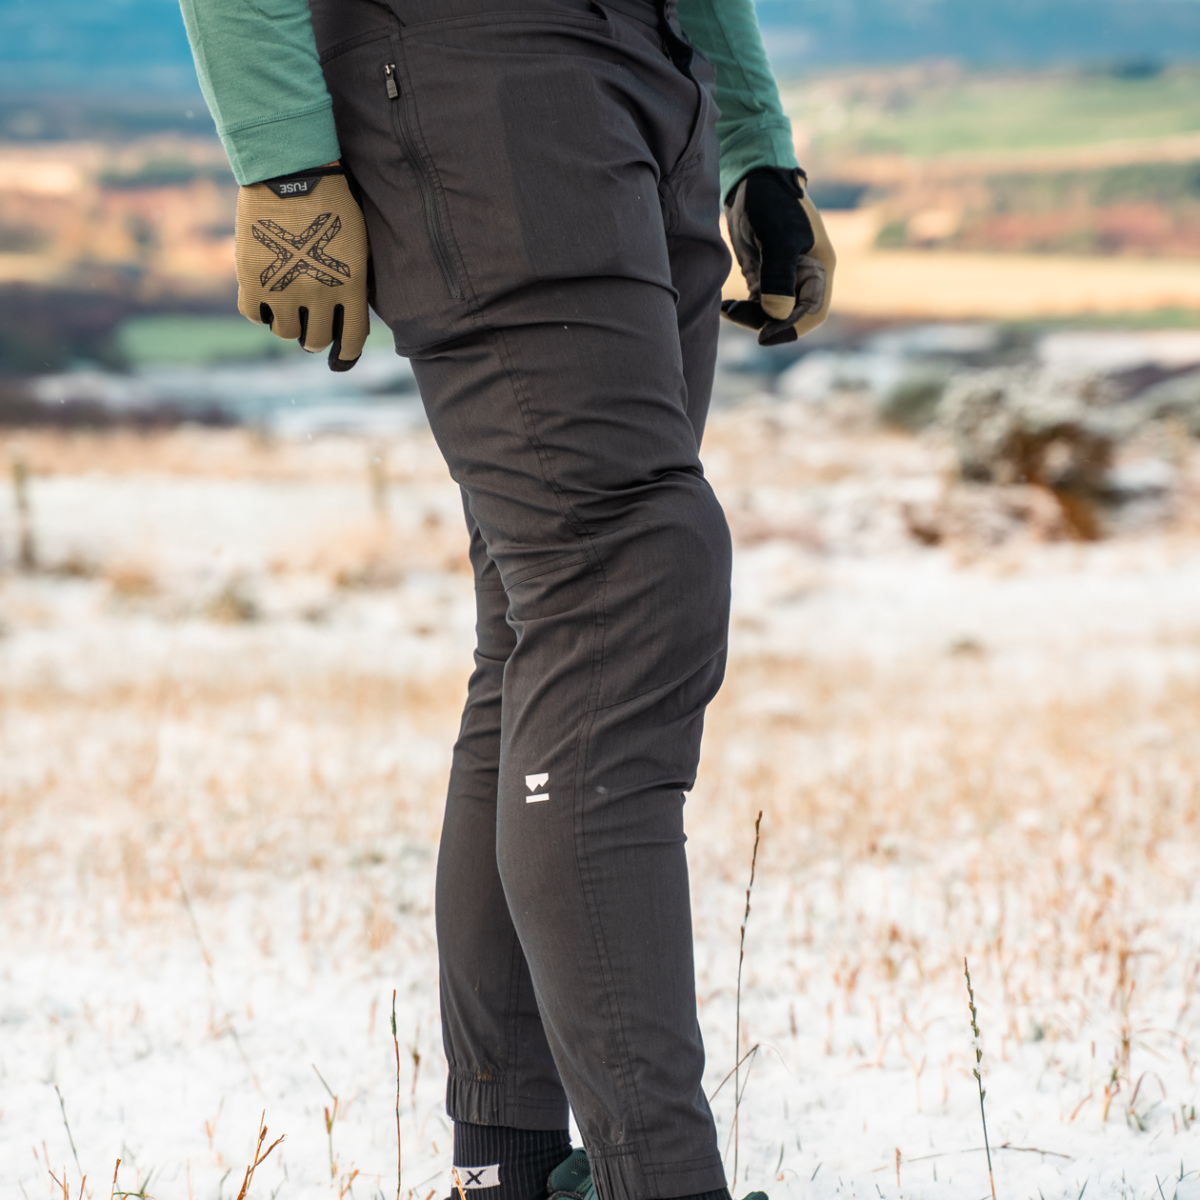 Mons Royale Tarn Merino Shift Wind Jersey and Virage Pants Review